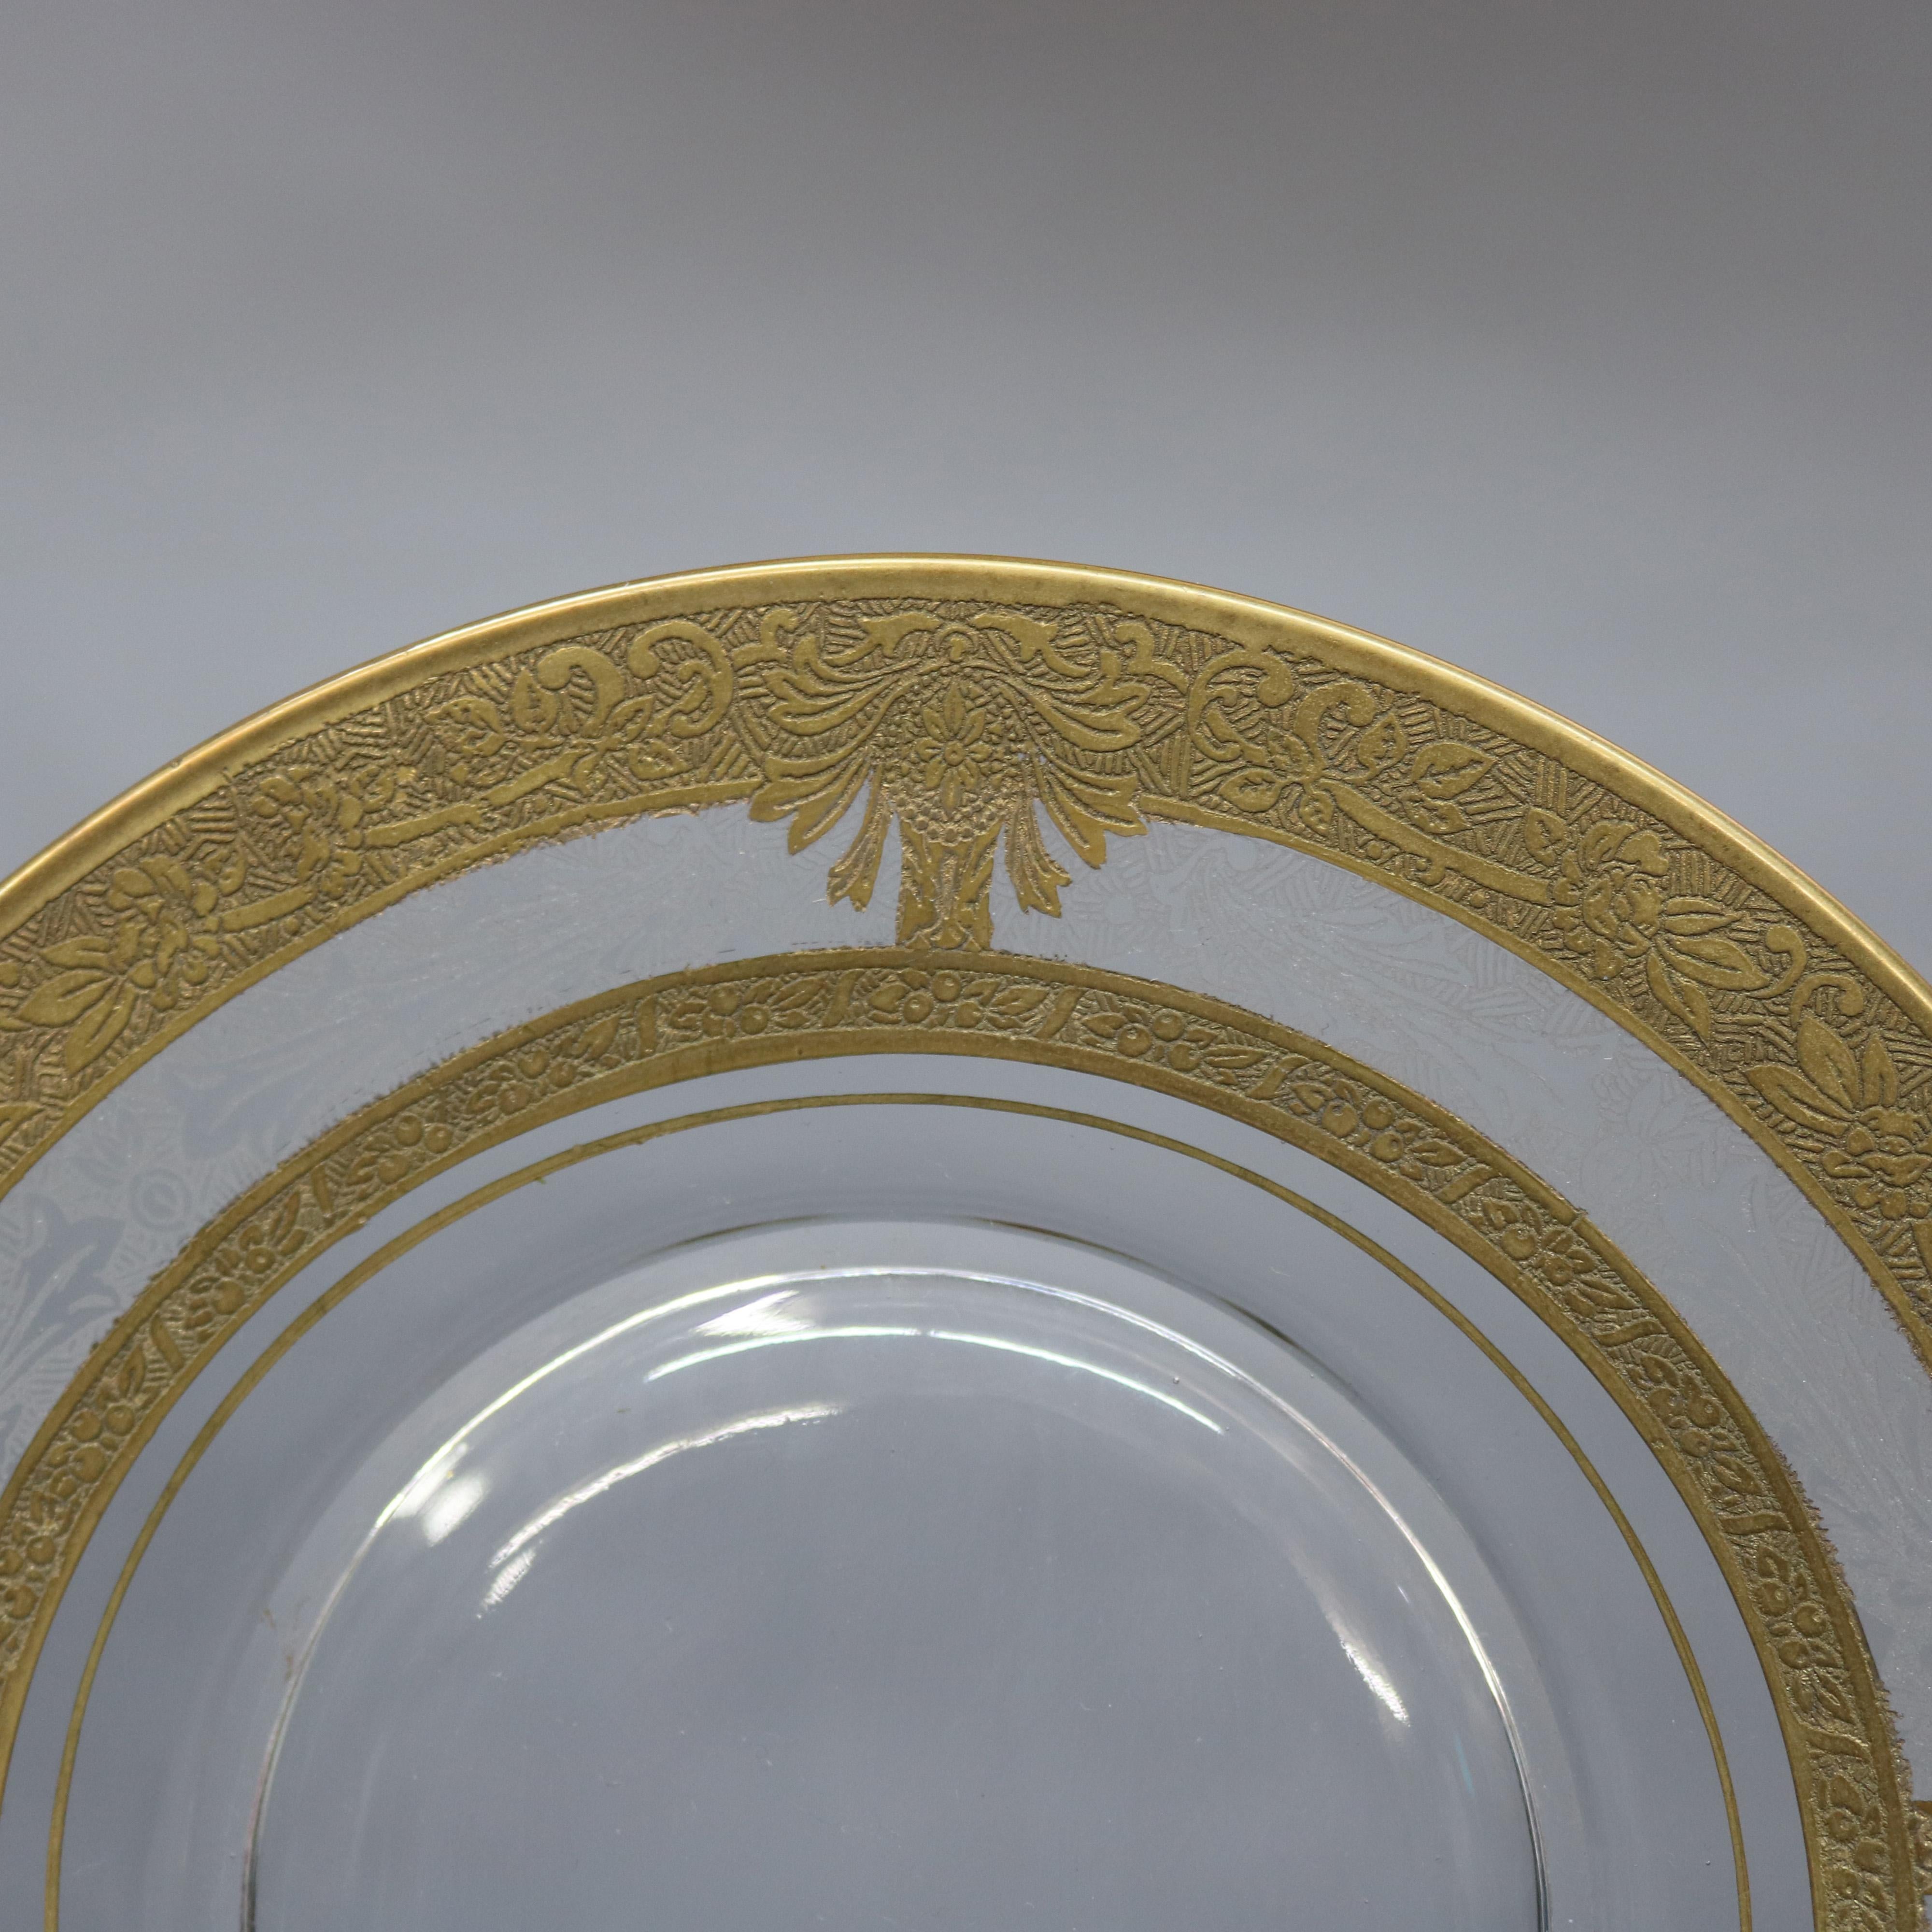 American Set of 16 Etched & Gilt Decorated Rimmed Glass Dessert Plates, 20th Century